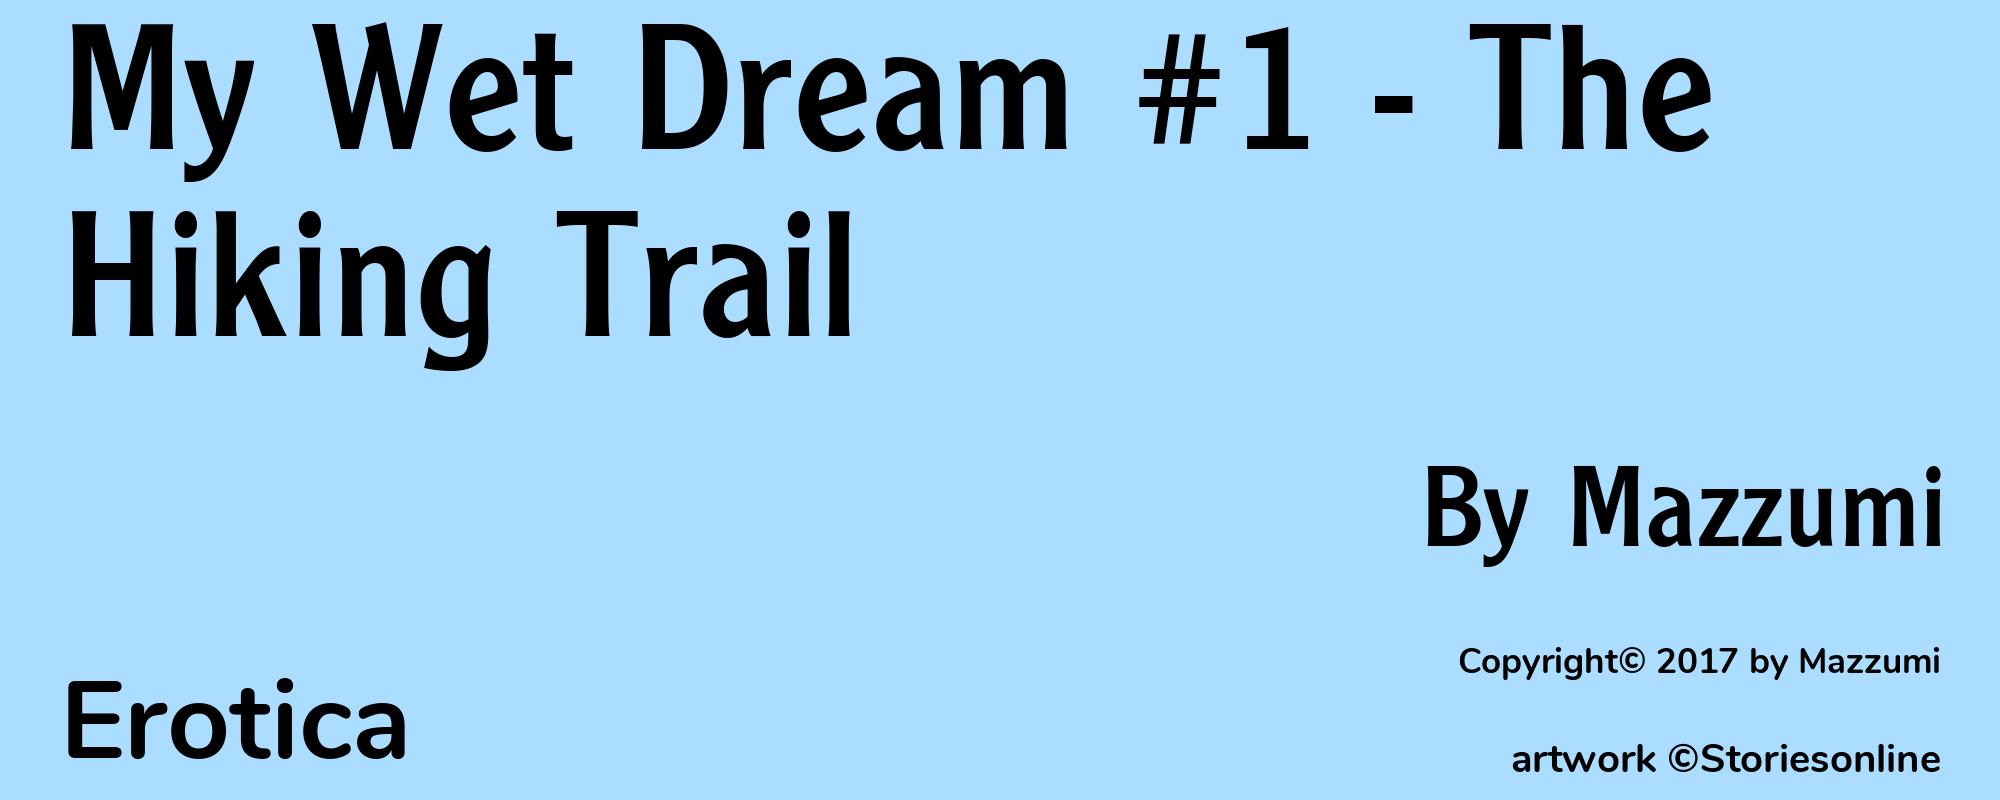 My Wet Dream #1 - The Hiking Trail - Cover